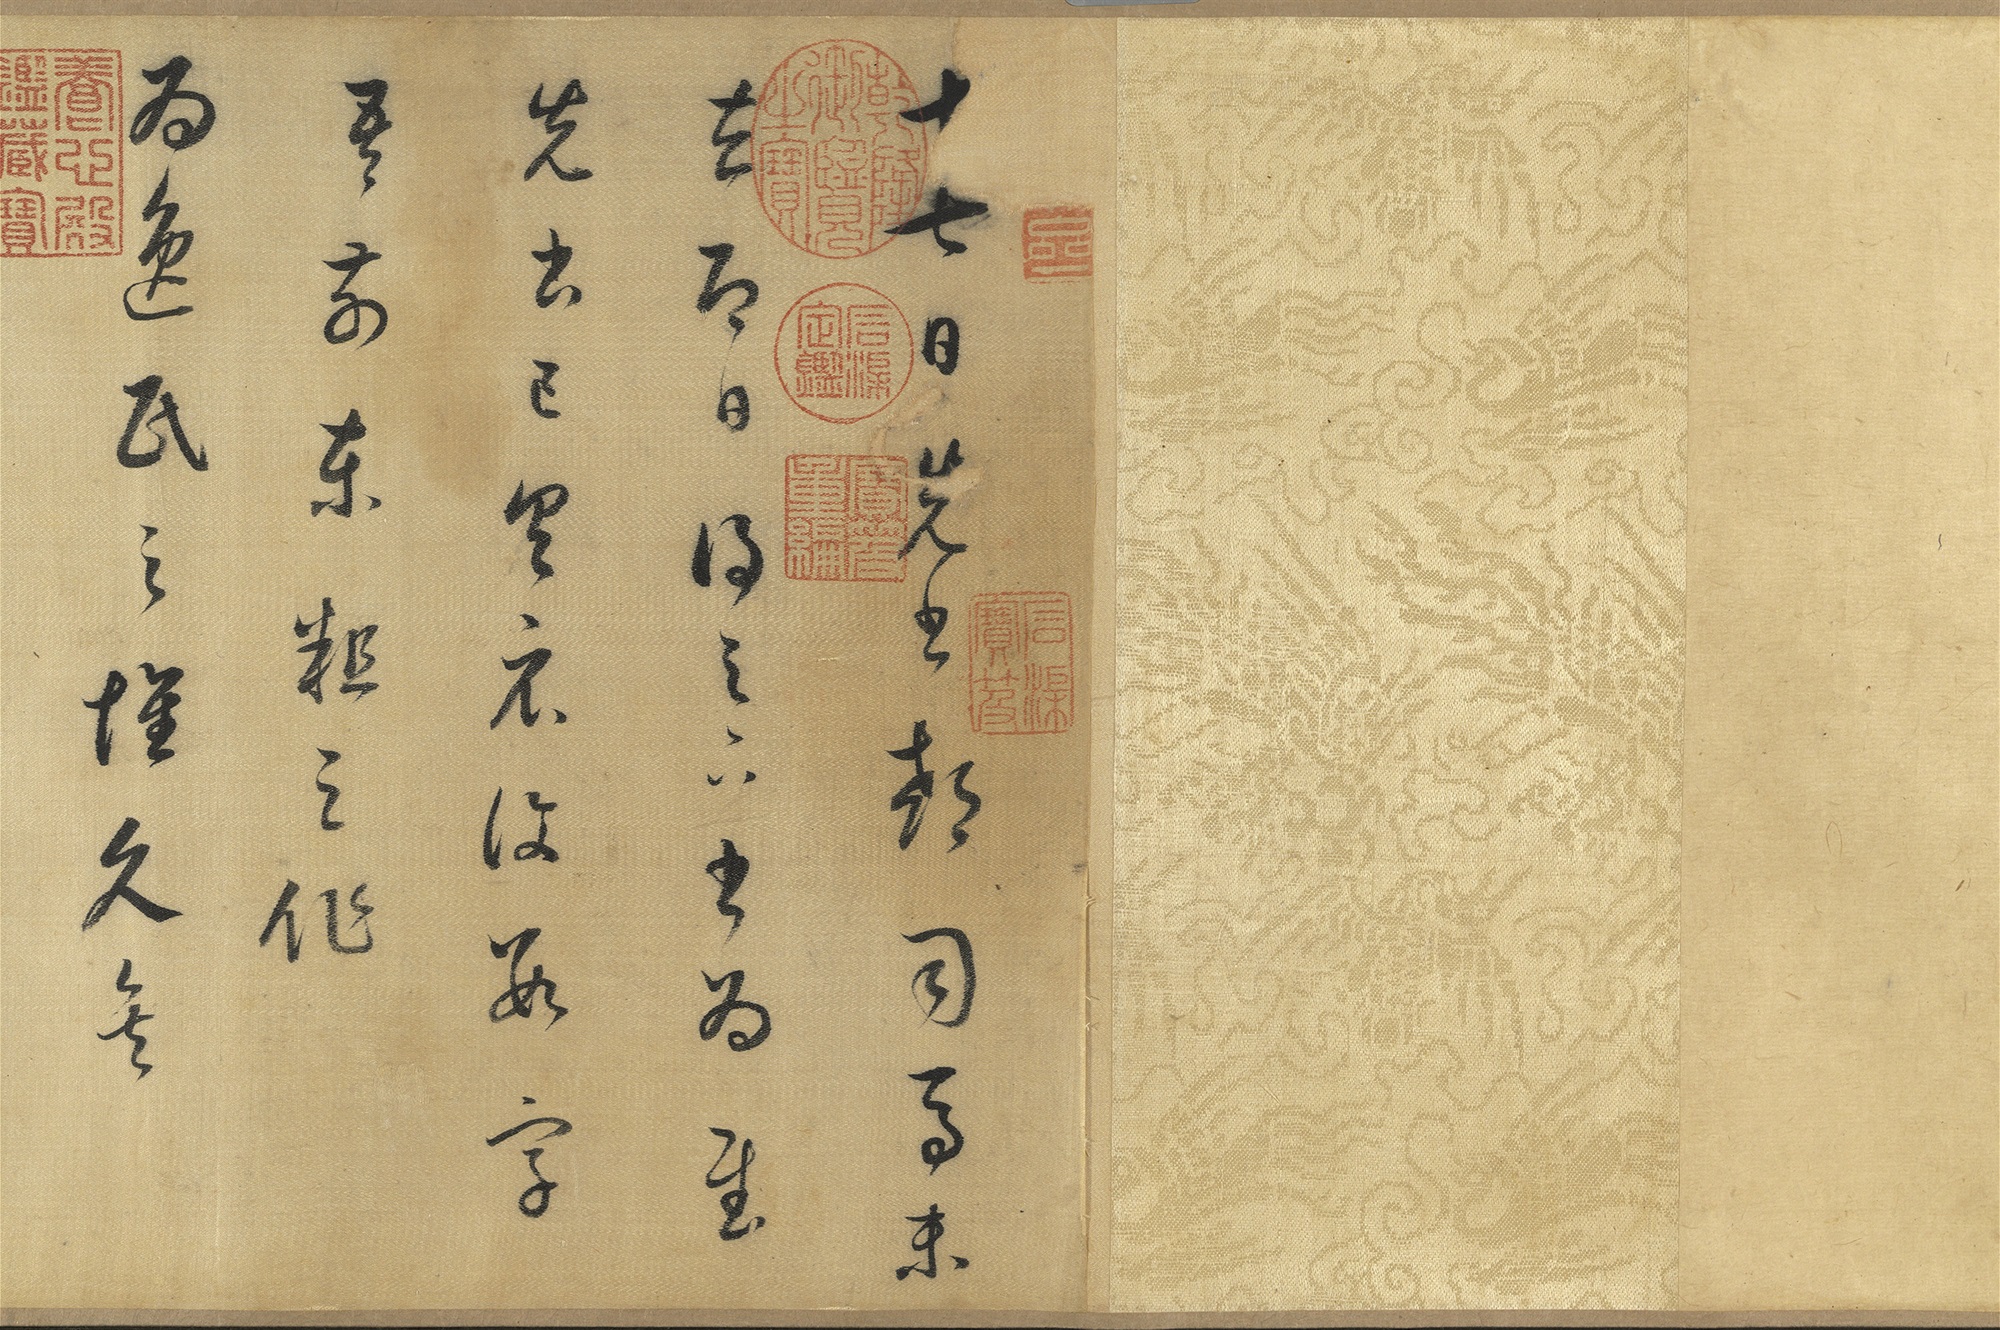 Copy of the “Seventeen Inscription” Dong Qichang, Ming dynastypreview